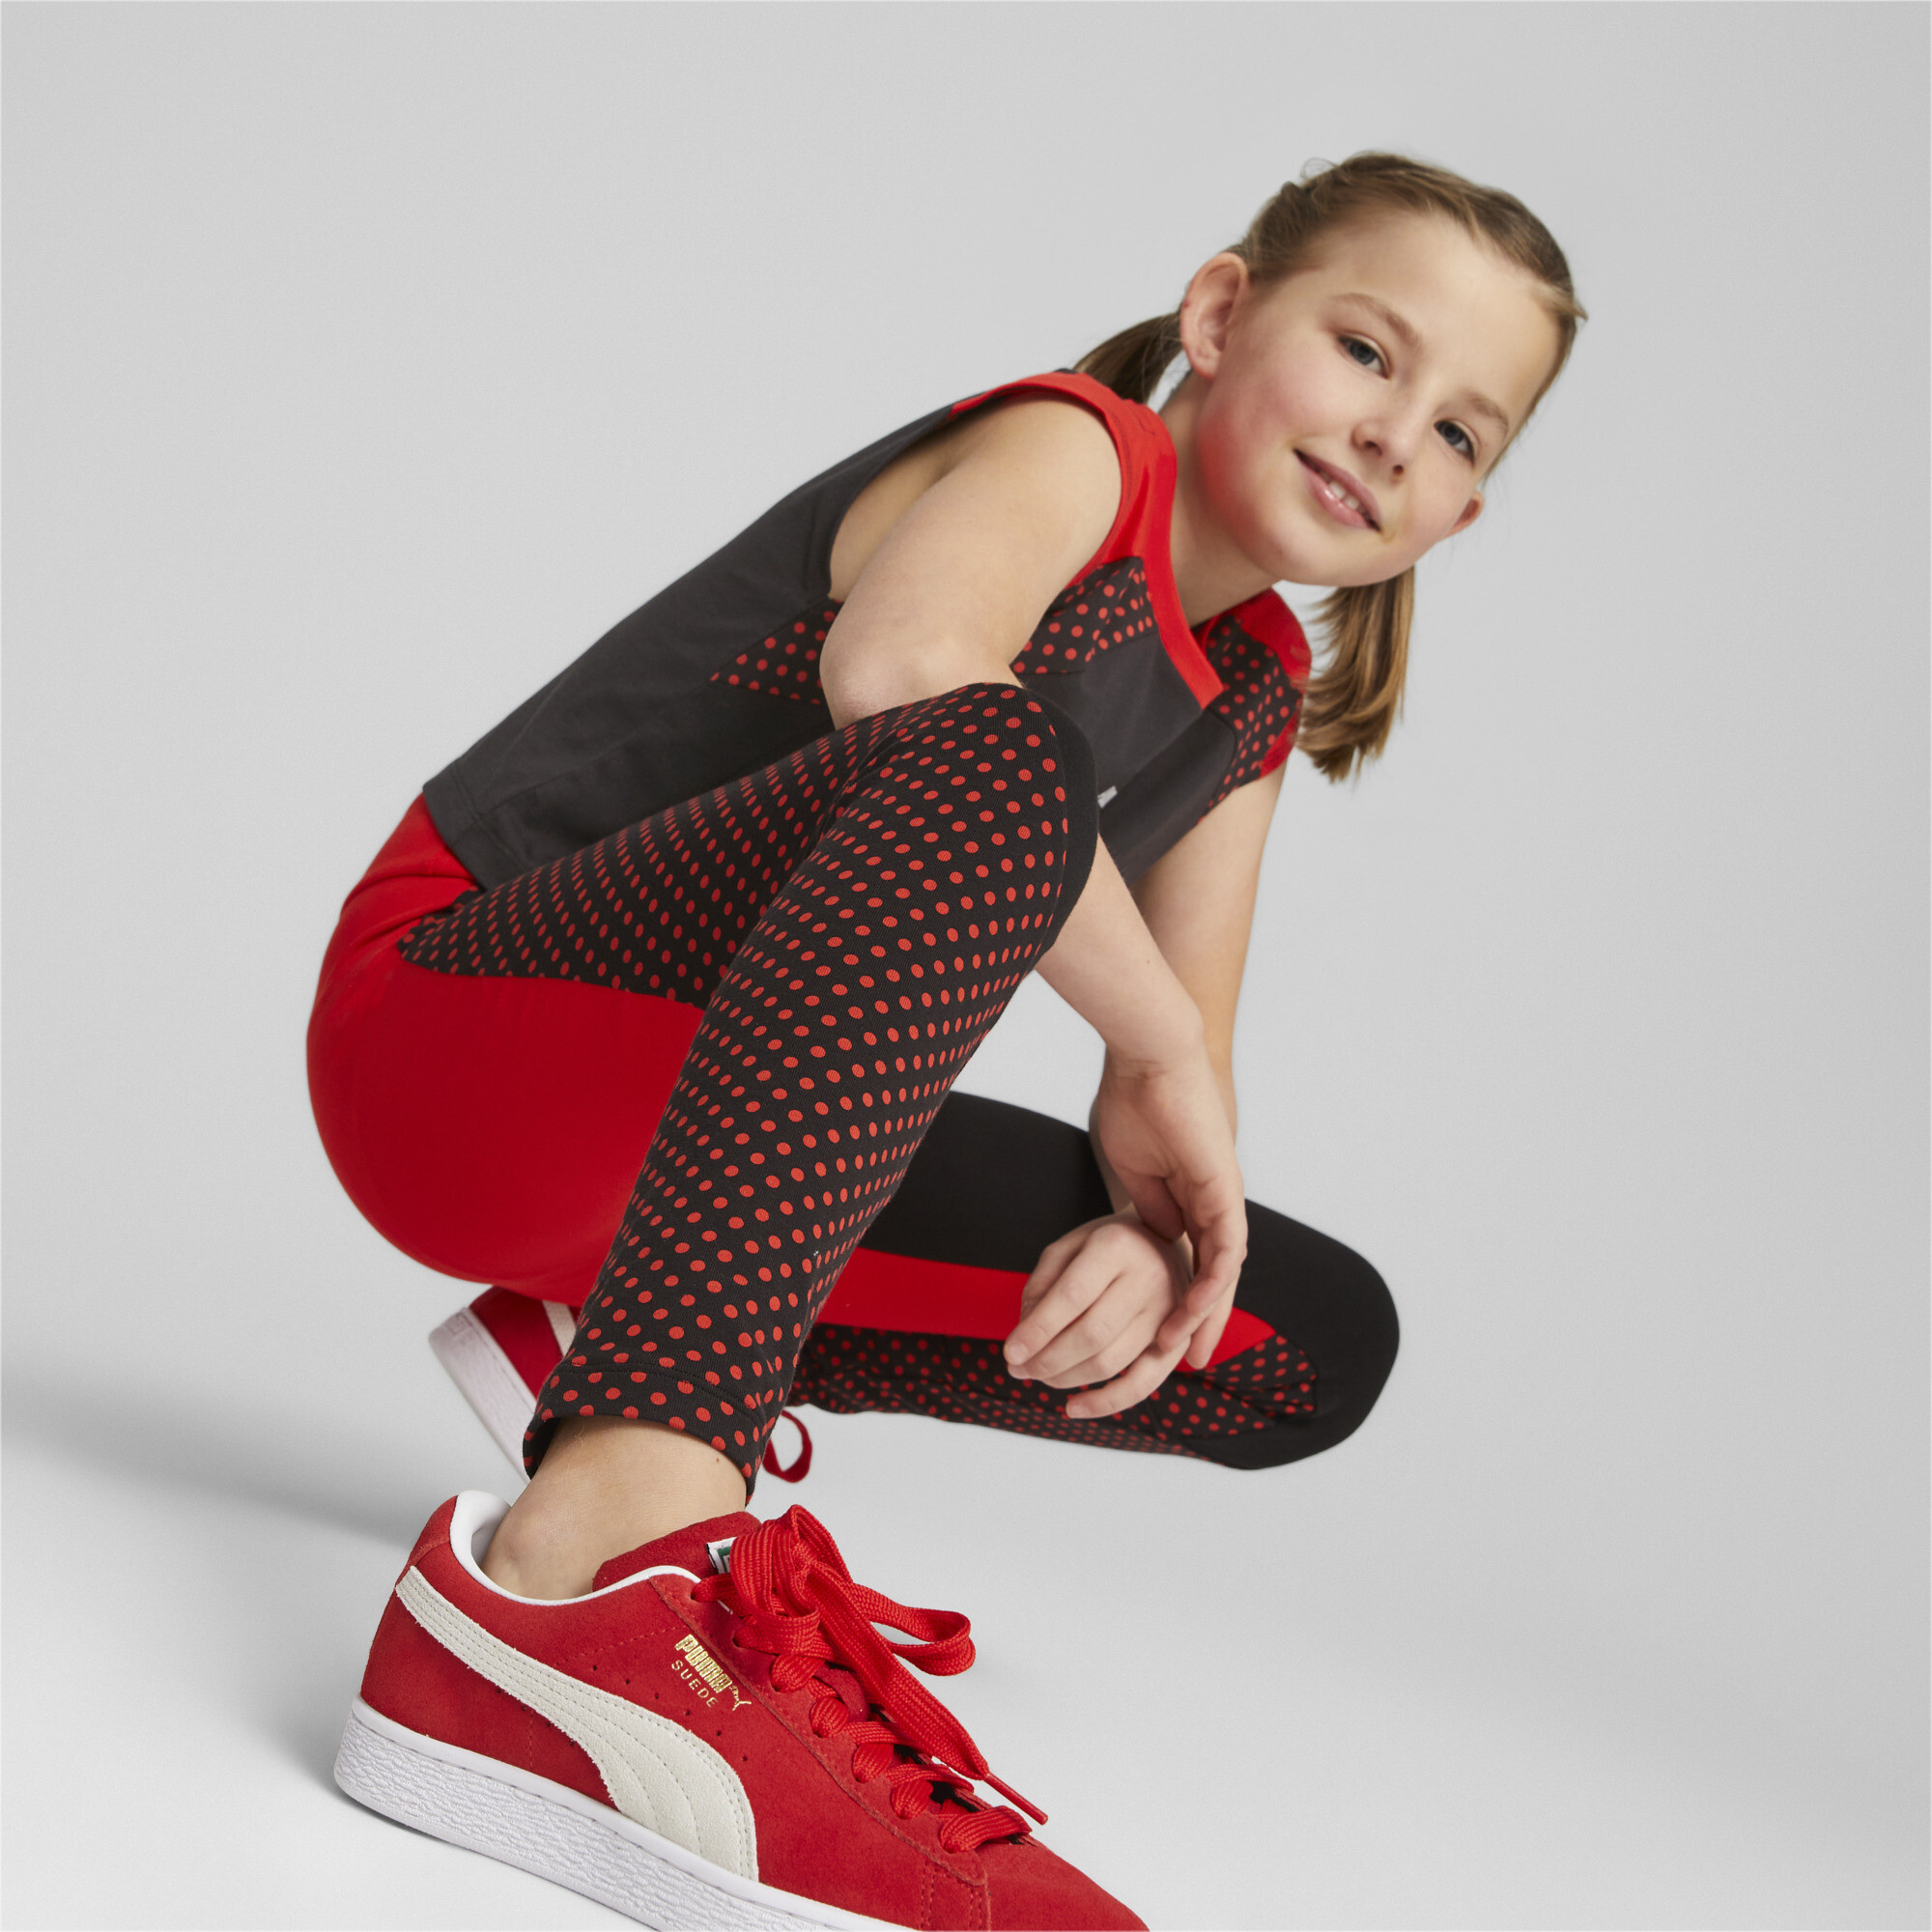 PUMA X MIRACULOUS Leggings In Black, Size 13-14 Youth